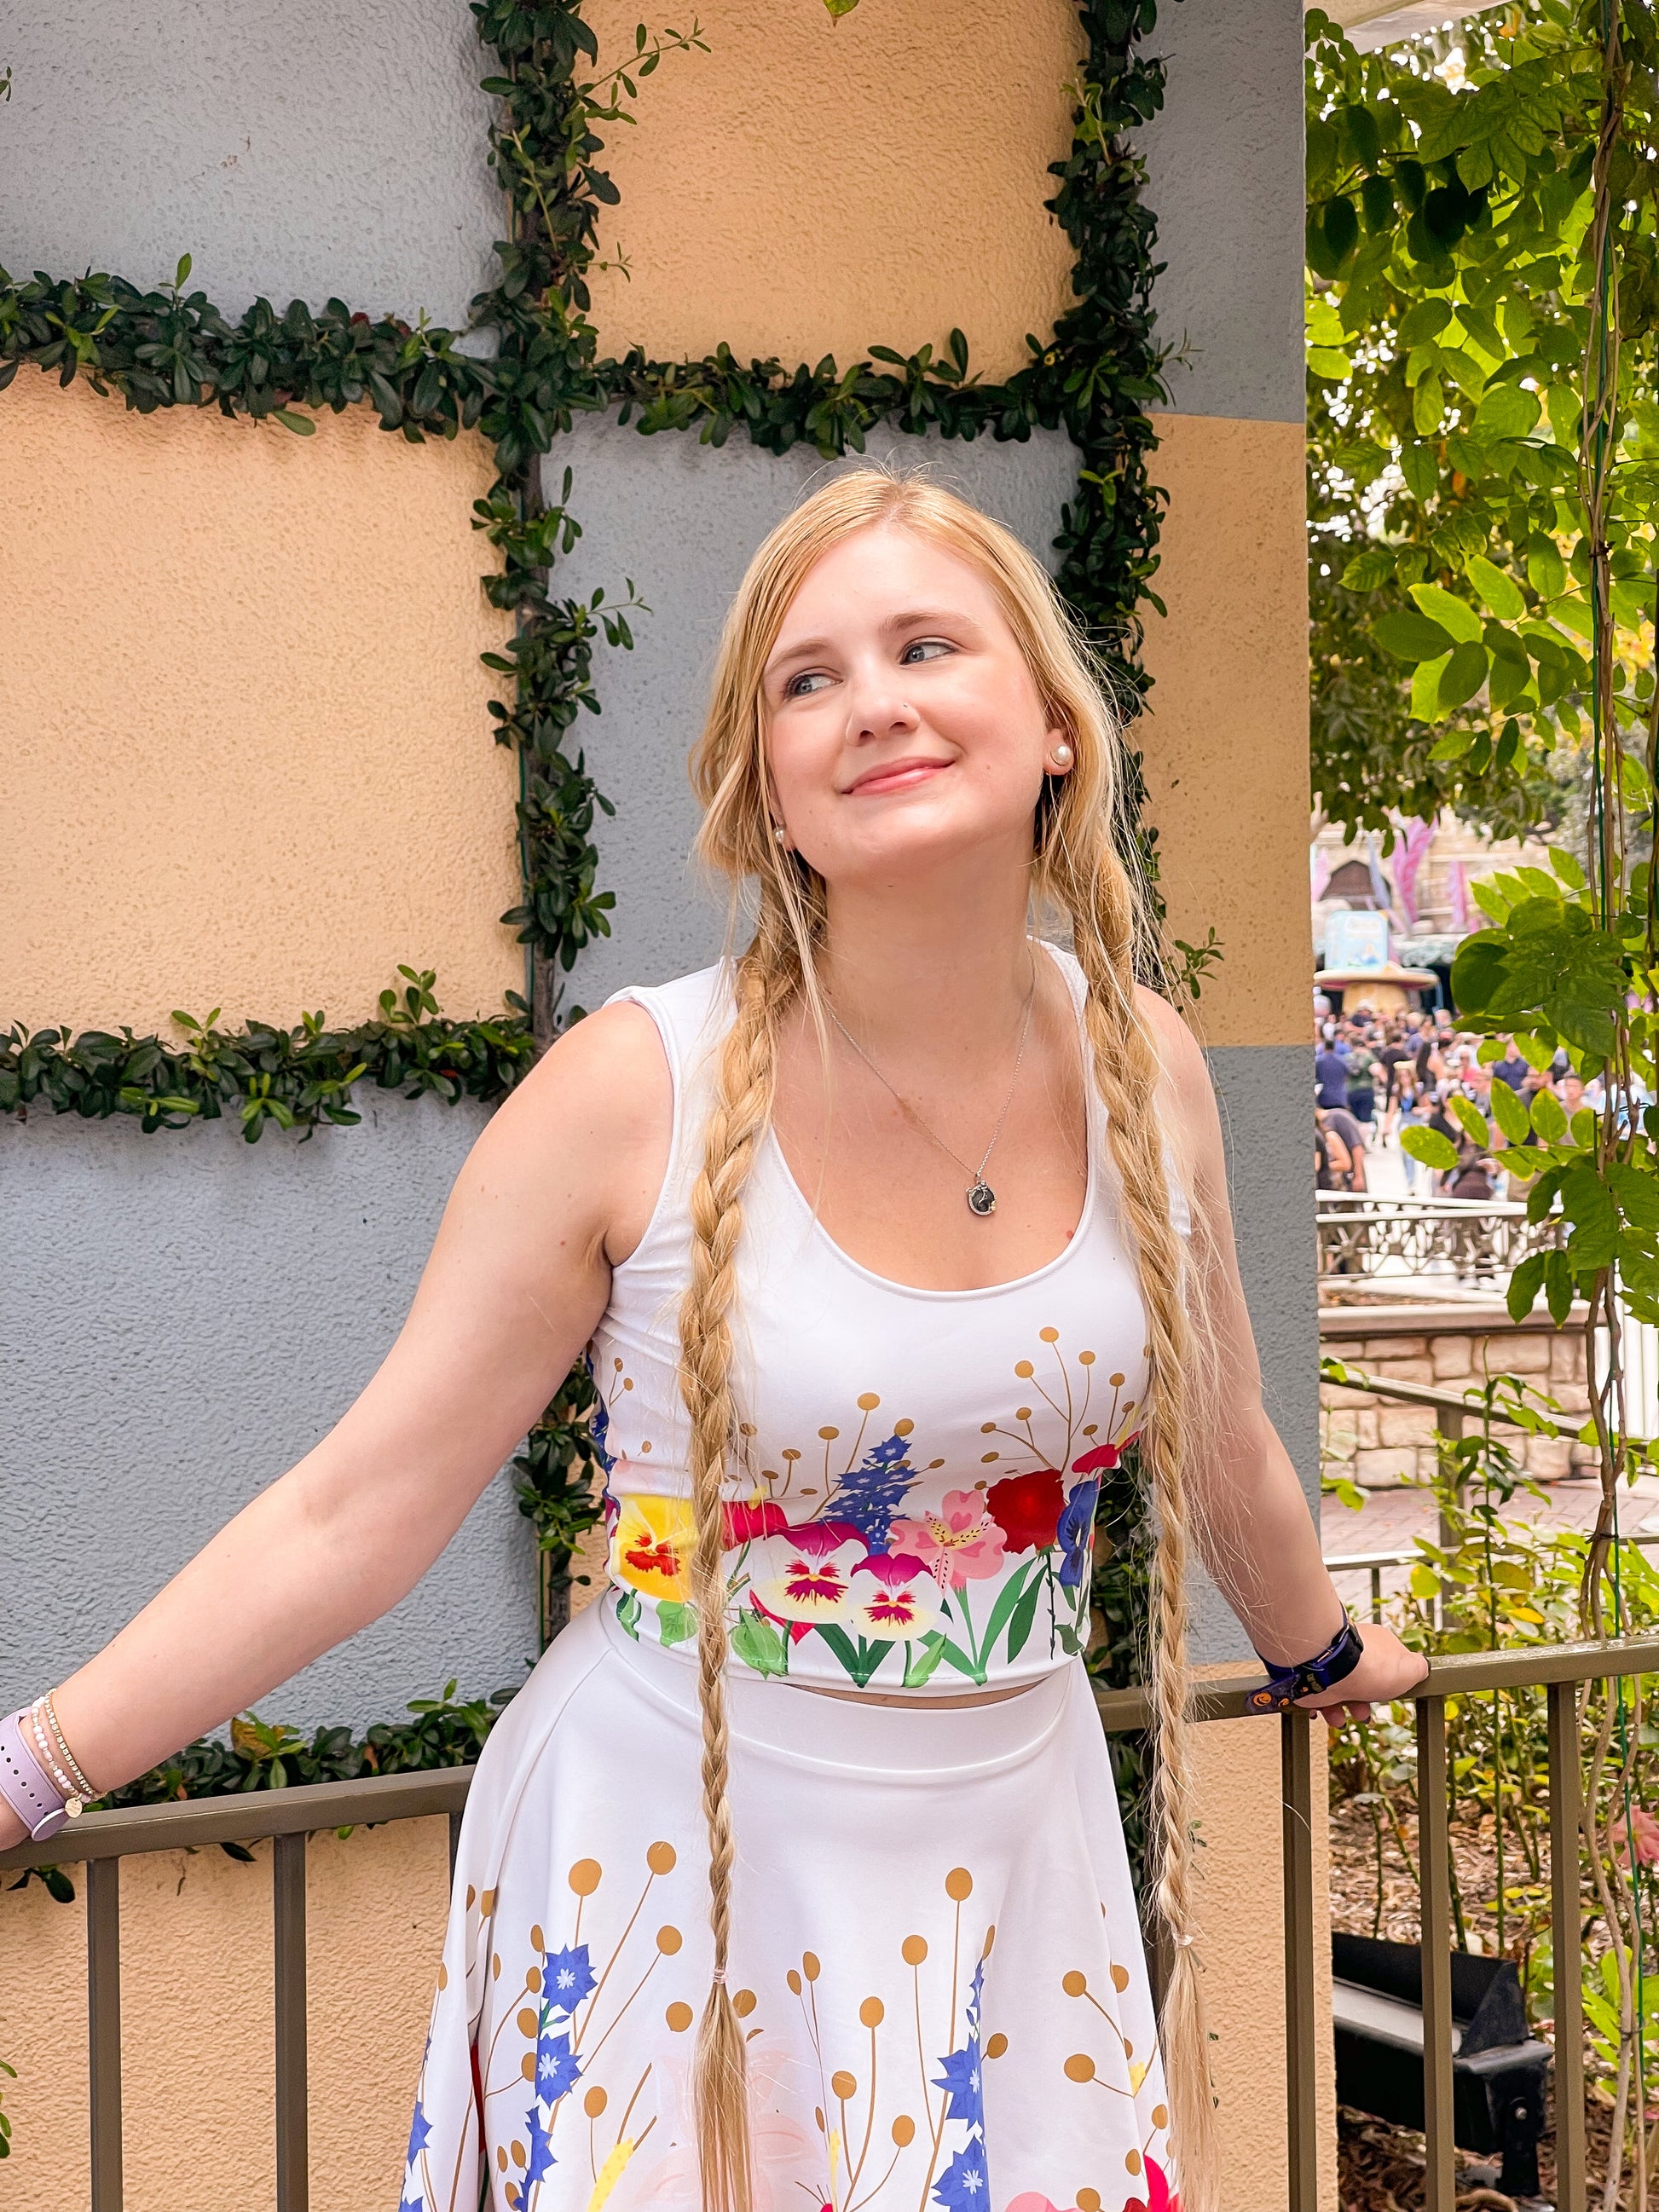 Our model wears a wonderland inspired ladies crop top outside of fantasyland at the famous Disneyland park. 